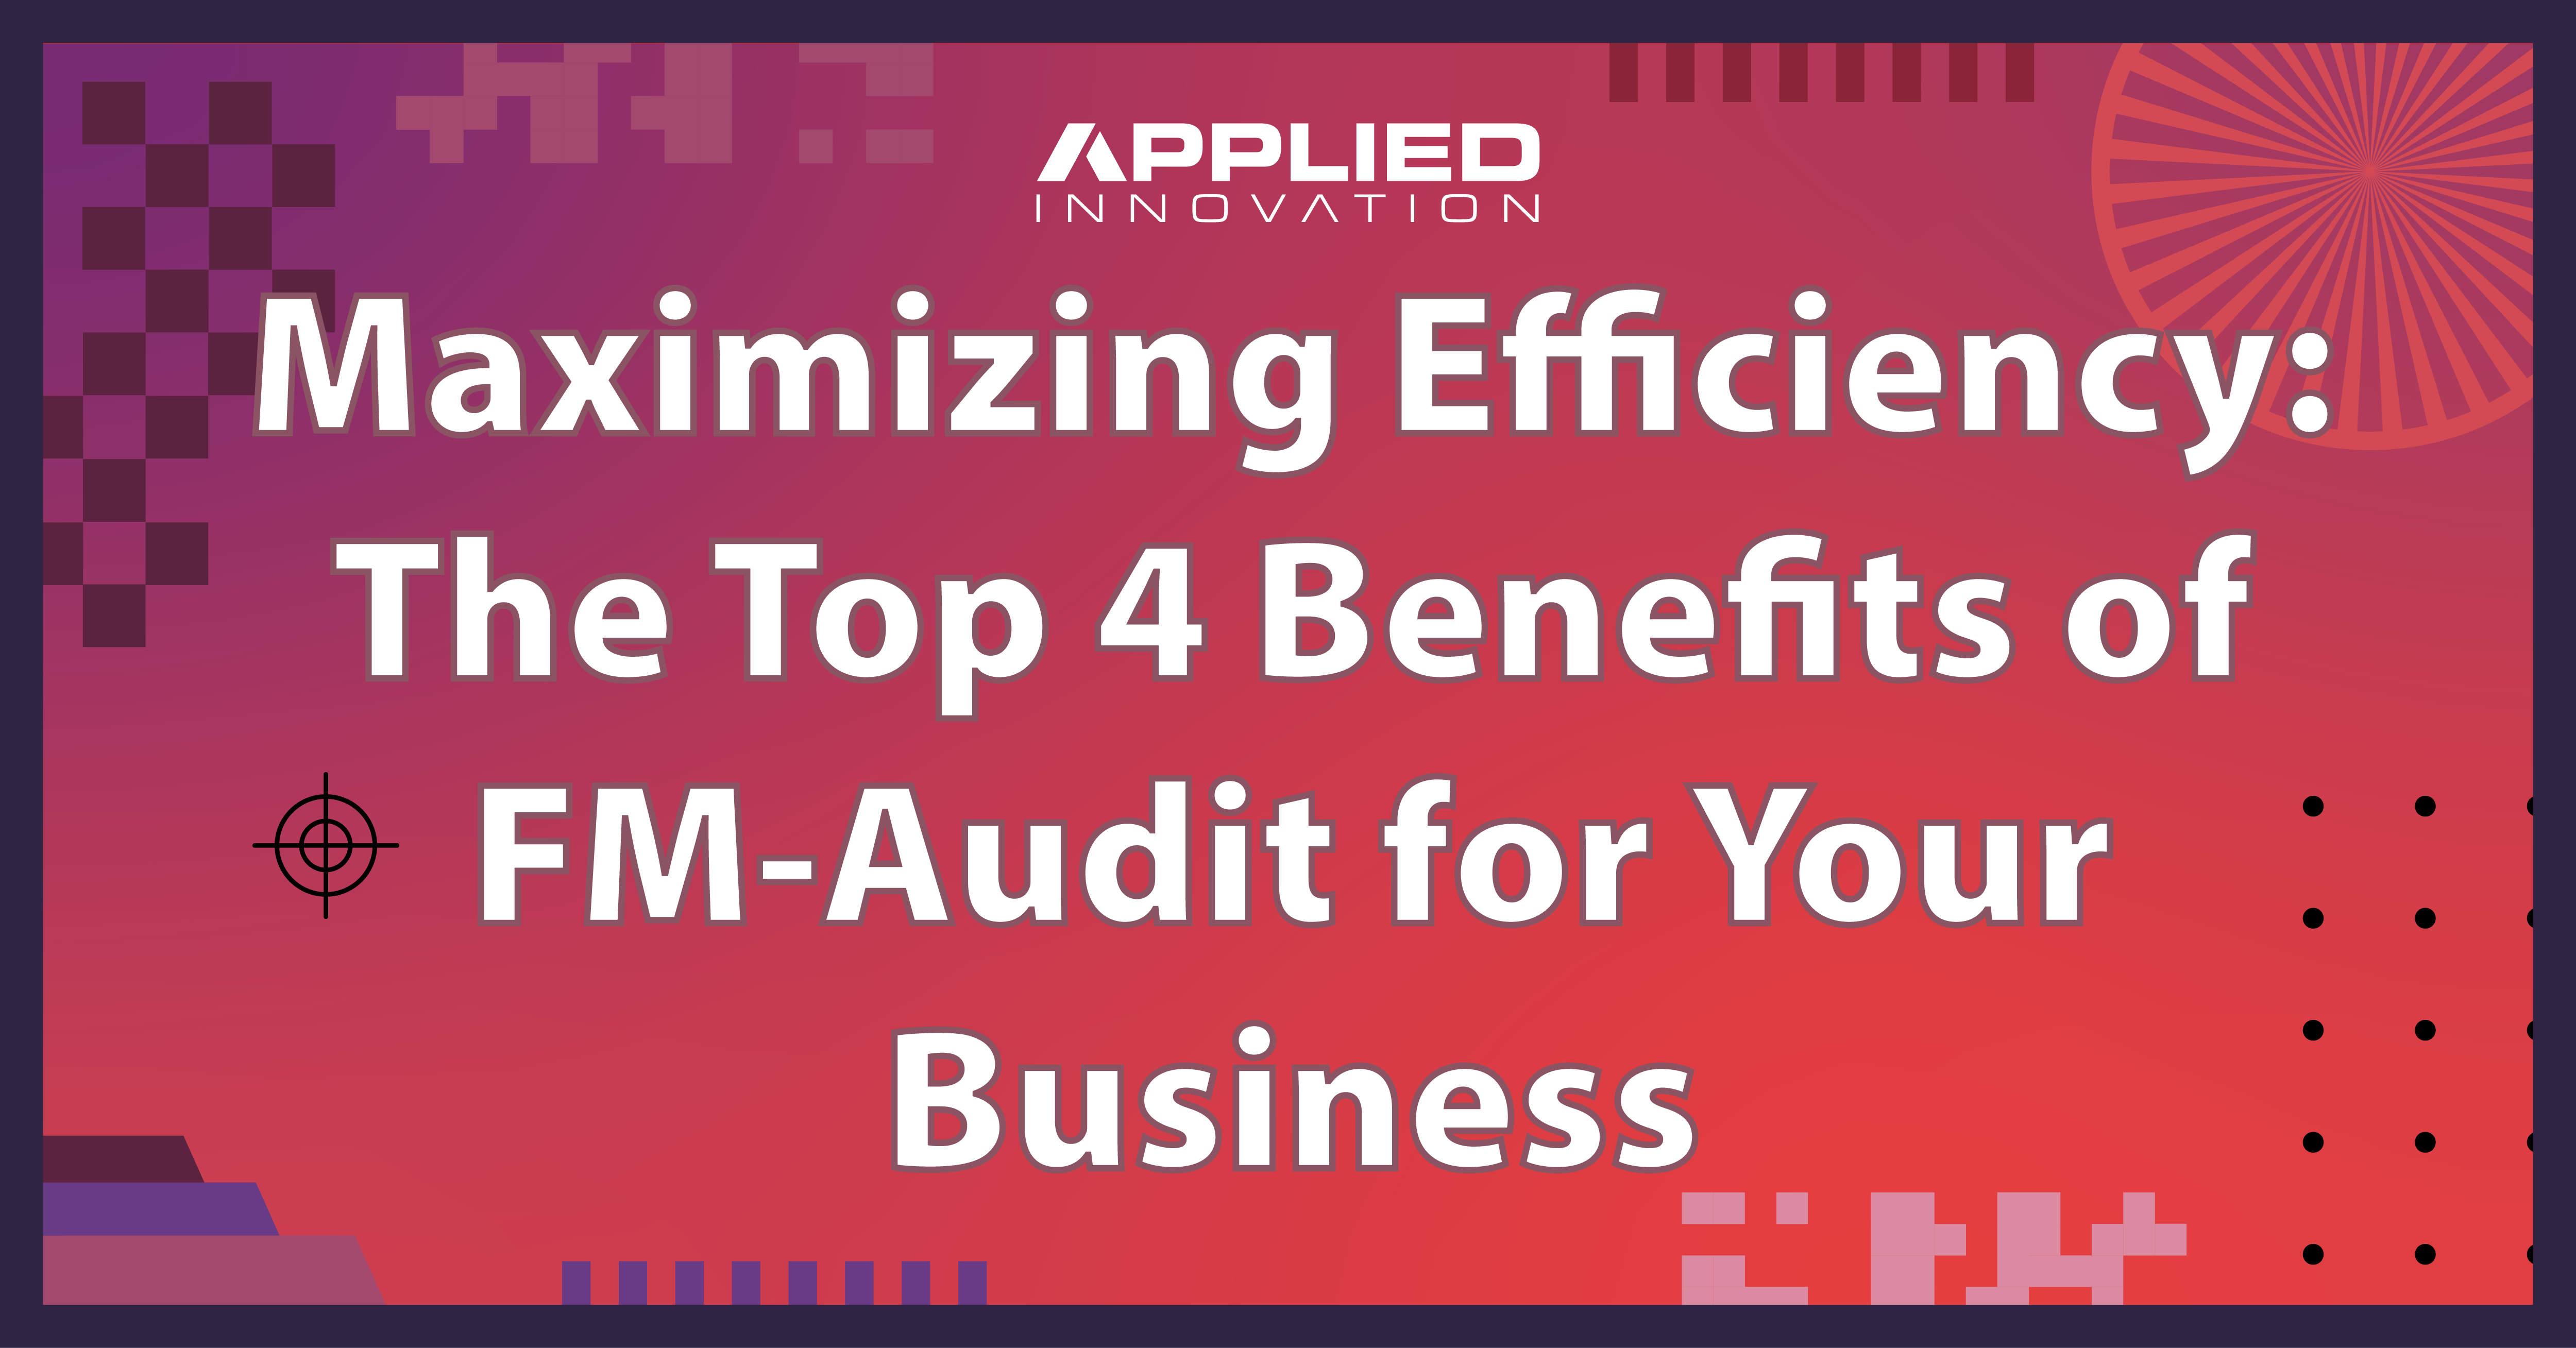 The top 4 benefits of fm audit for your business